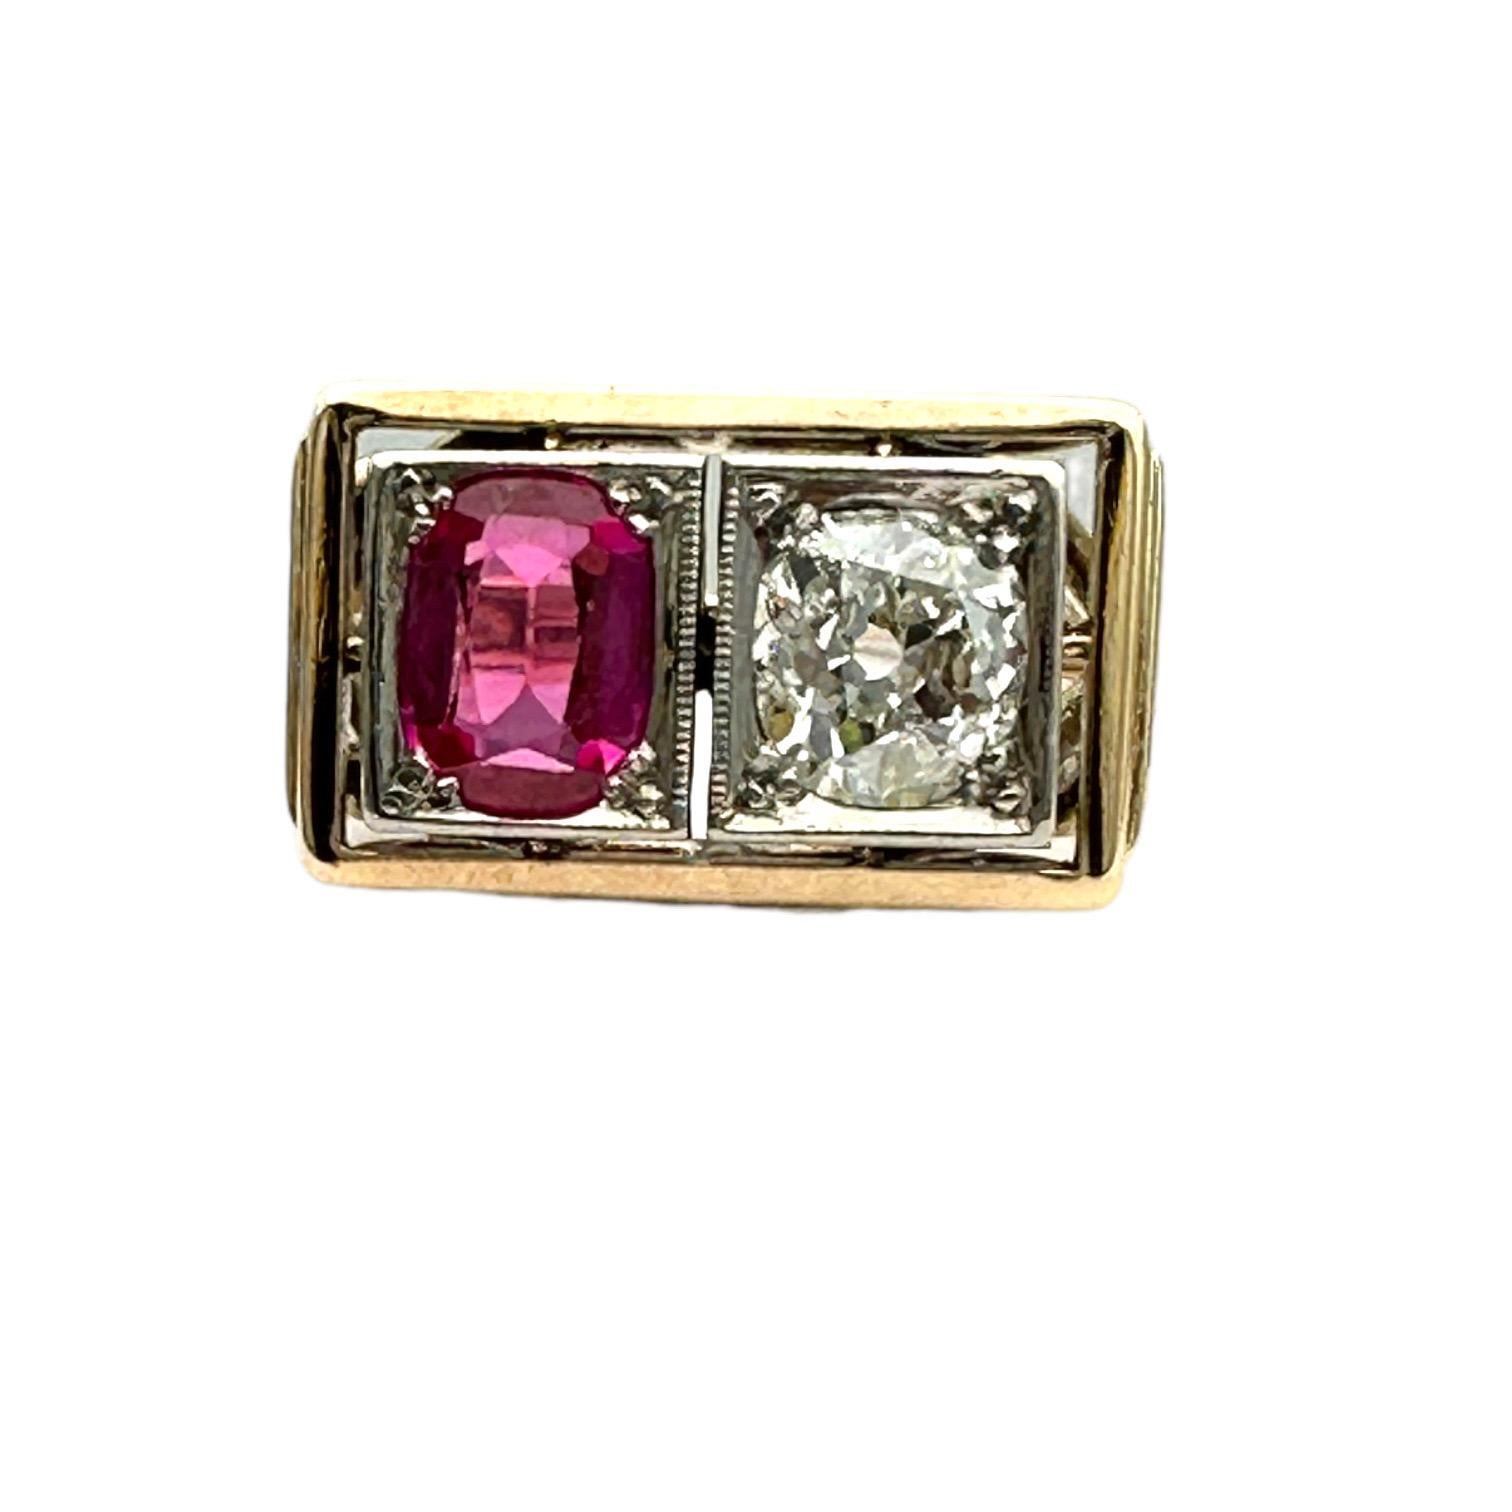 1800's Art Deco Old Miners Cut Diamond & Ruby 2.20 Carat Ring For Sale 4